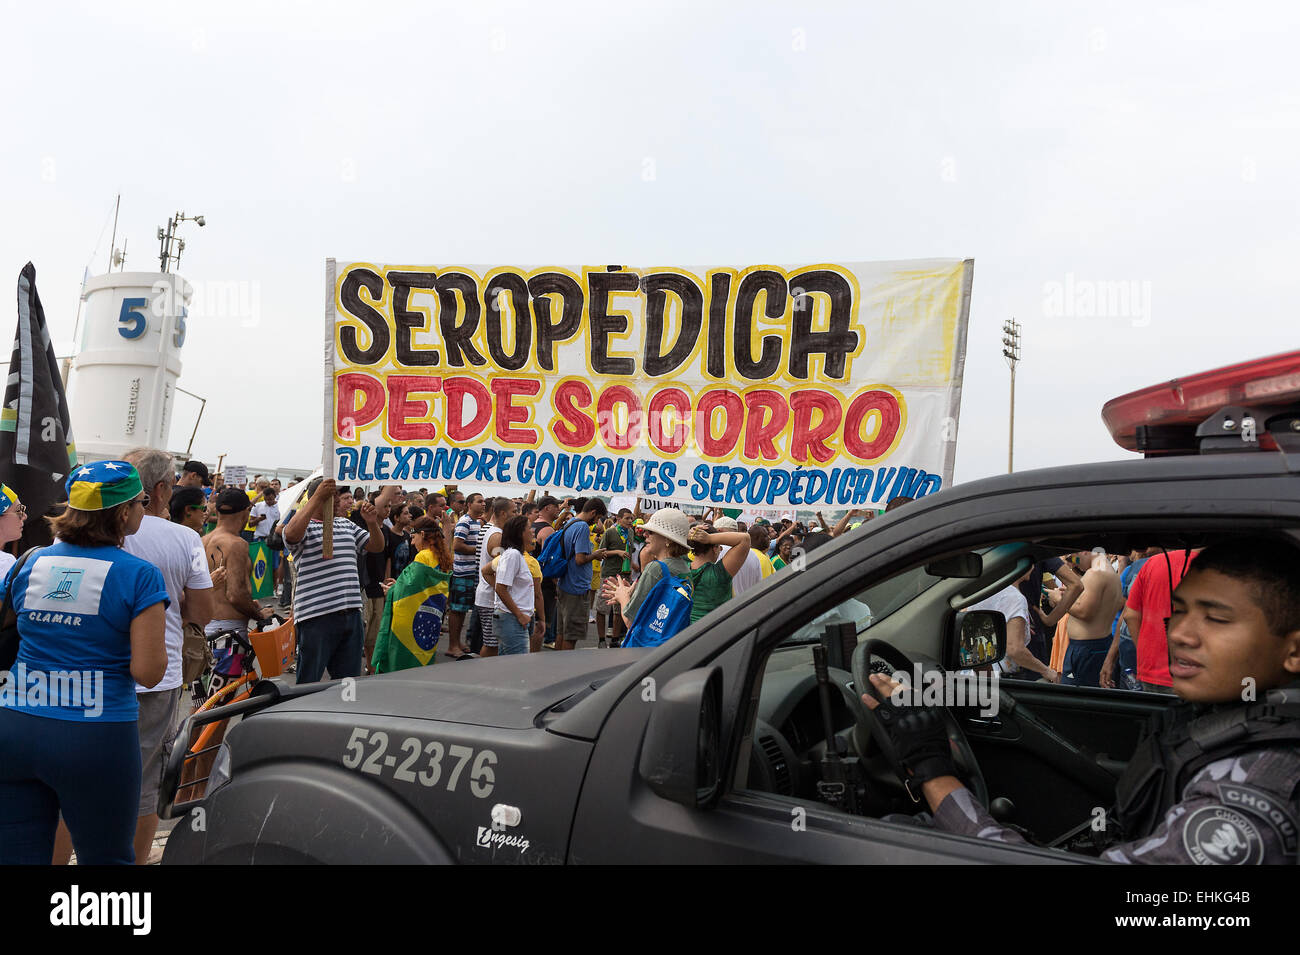 Rio De Janeiro, RJ, Brazil. 16th Mar, 2015. People from Seropedica, a city 2 hours out of Rio, attented the protest and ask for help.On Sunday, March 15th, a big crowd is gathering at Copacabana beach, south side of Rio City, Brazil. People from everywhere and all social classes, came to the streets to protest against Dilma Roussef, and are demanding her impeachment. They claim for justice, dignity, security, education and are saying ''No More Corruption' Credit:  Peter Bauza/ZUMA Wire/ZUMAPRESS.com/Alamy Live News Stock Photo